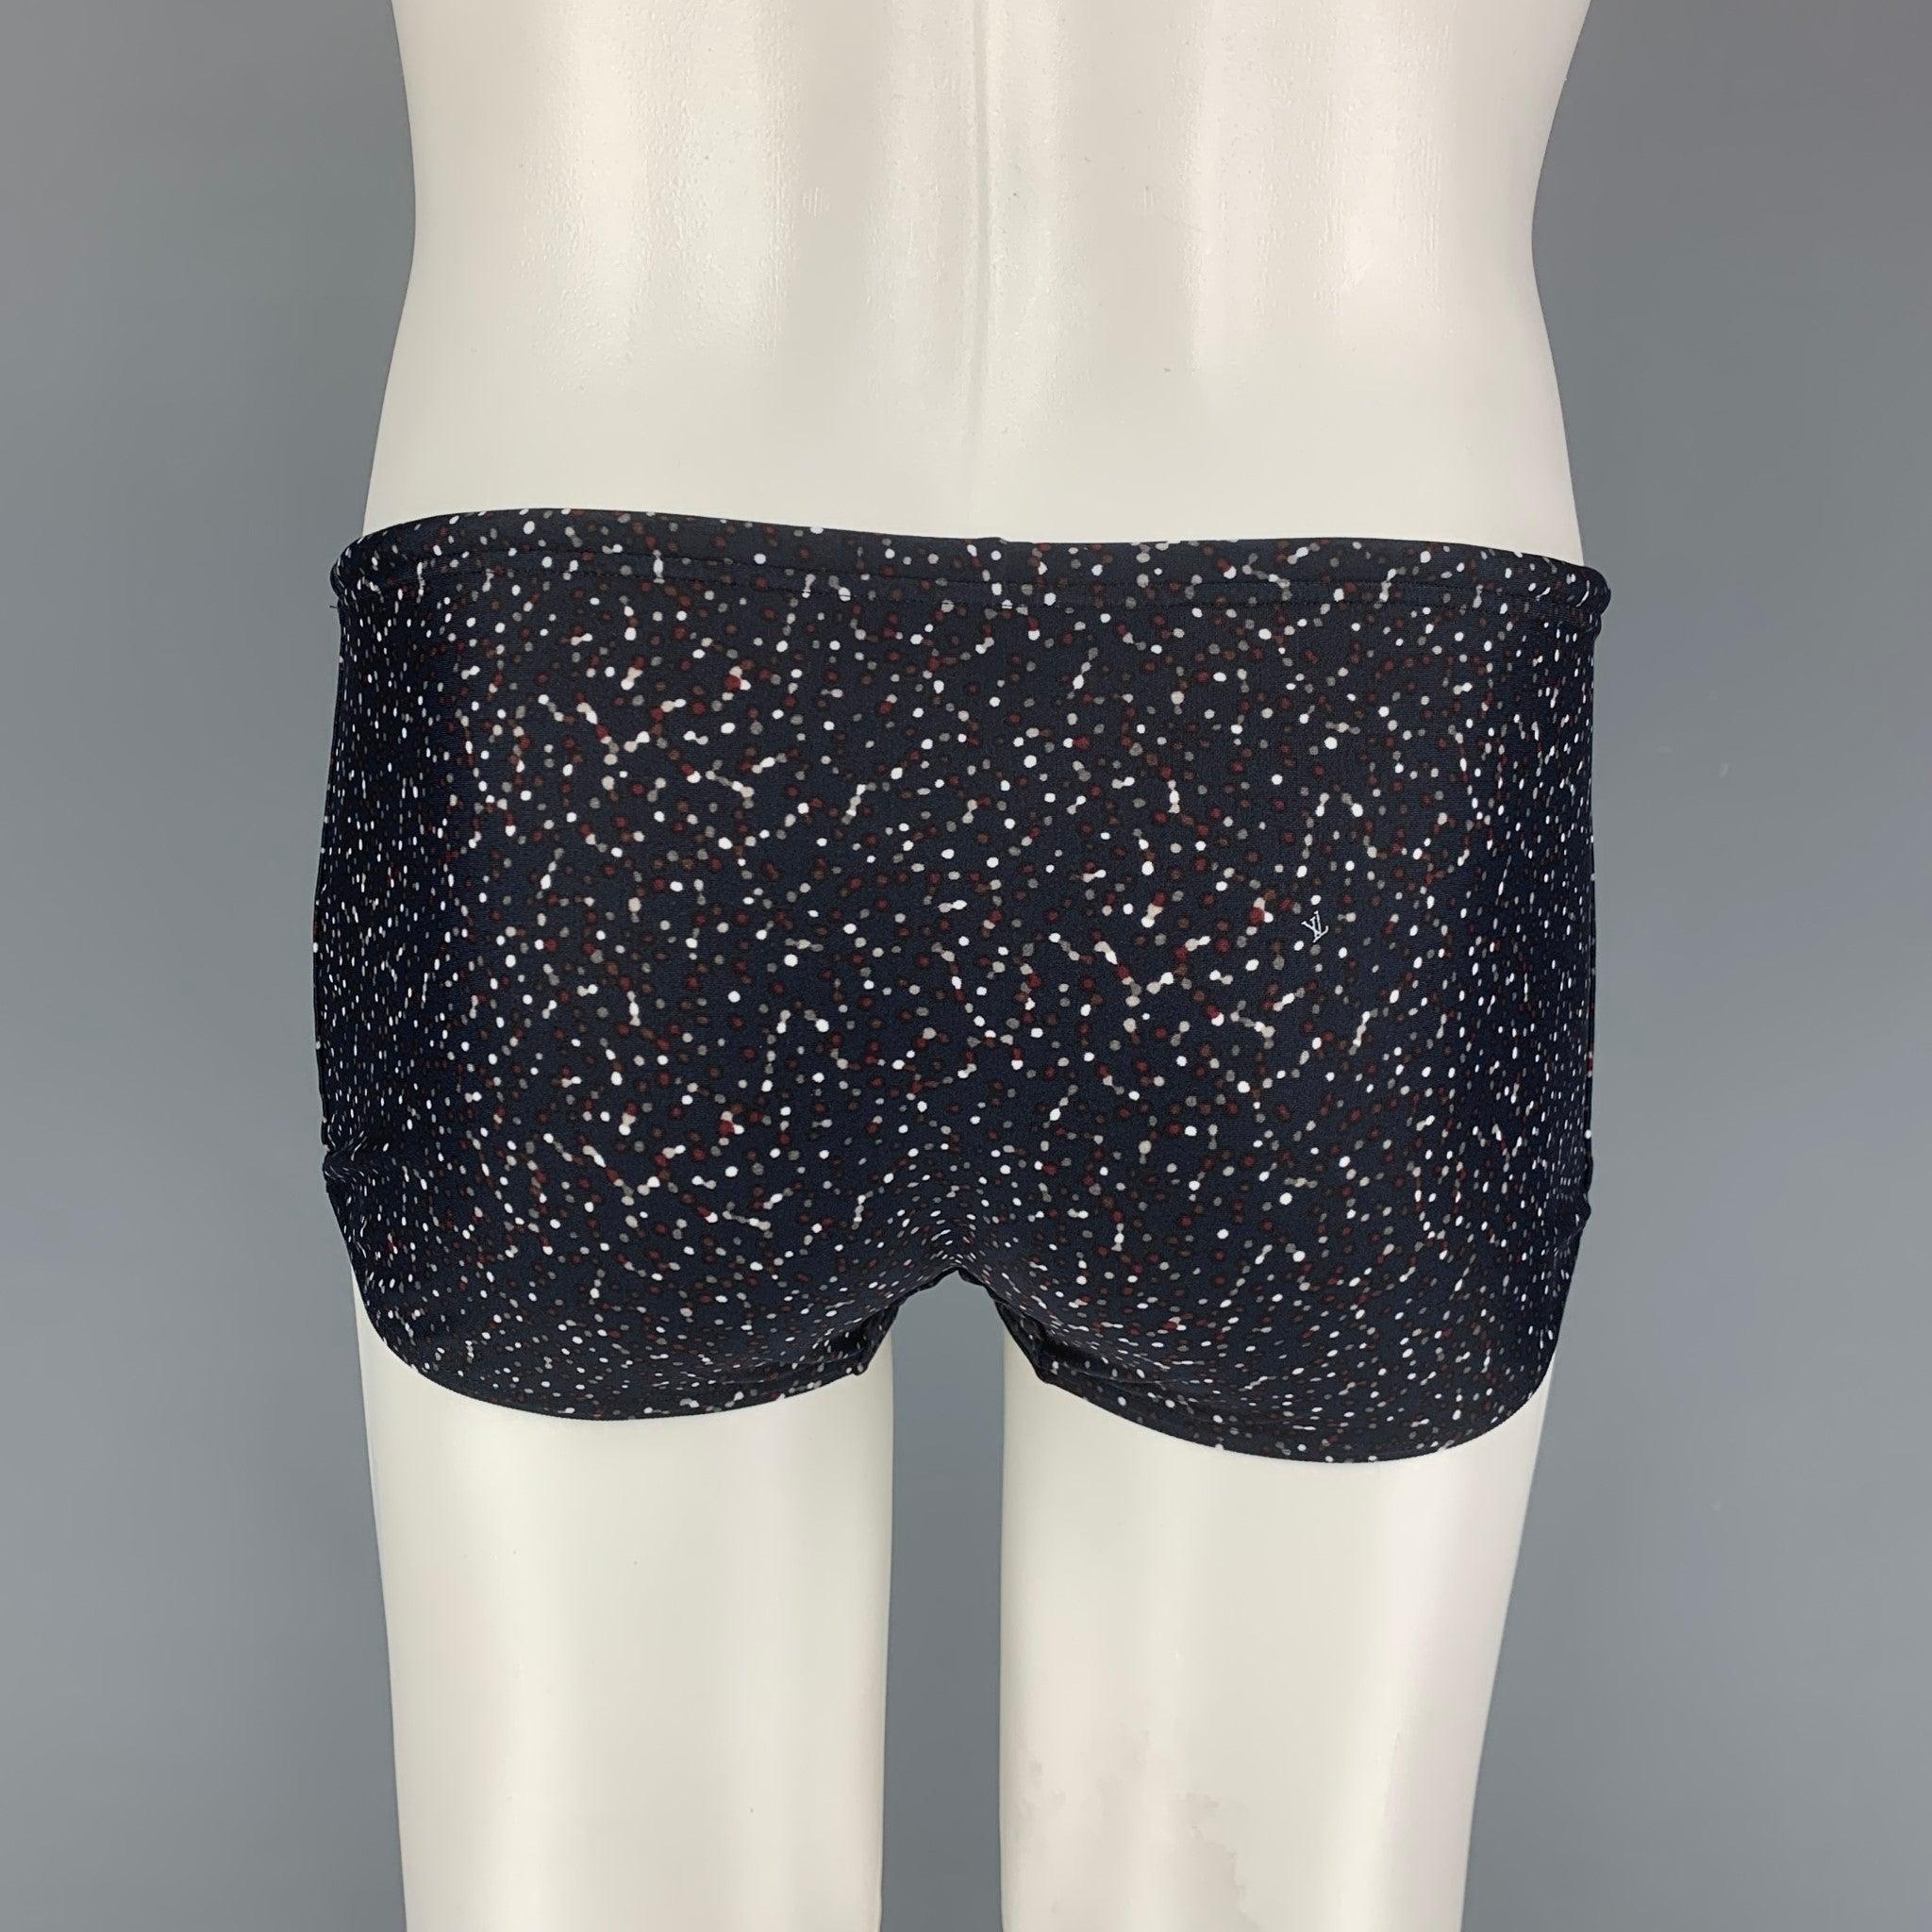 LOUIS VUITTON speedo comes in a black & white print nylon featuring a drawstring detail and gold tone logo hardware. Made in Italy.
Very Good
Pre-Owned Condition. 

Marked:   M  

Measurements: 
  Waist: 26 inches  Rise: 6.5 inches  Inseam: 2 inches